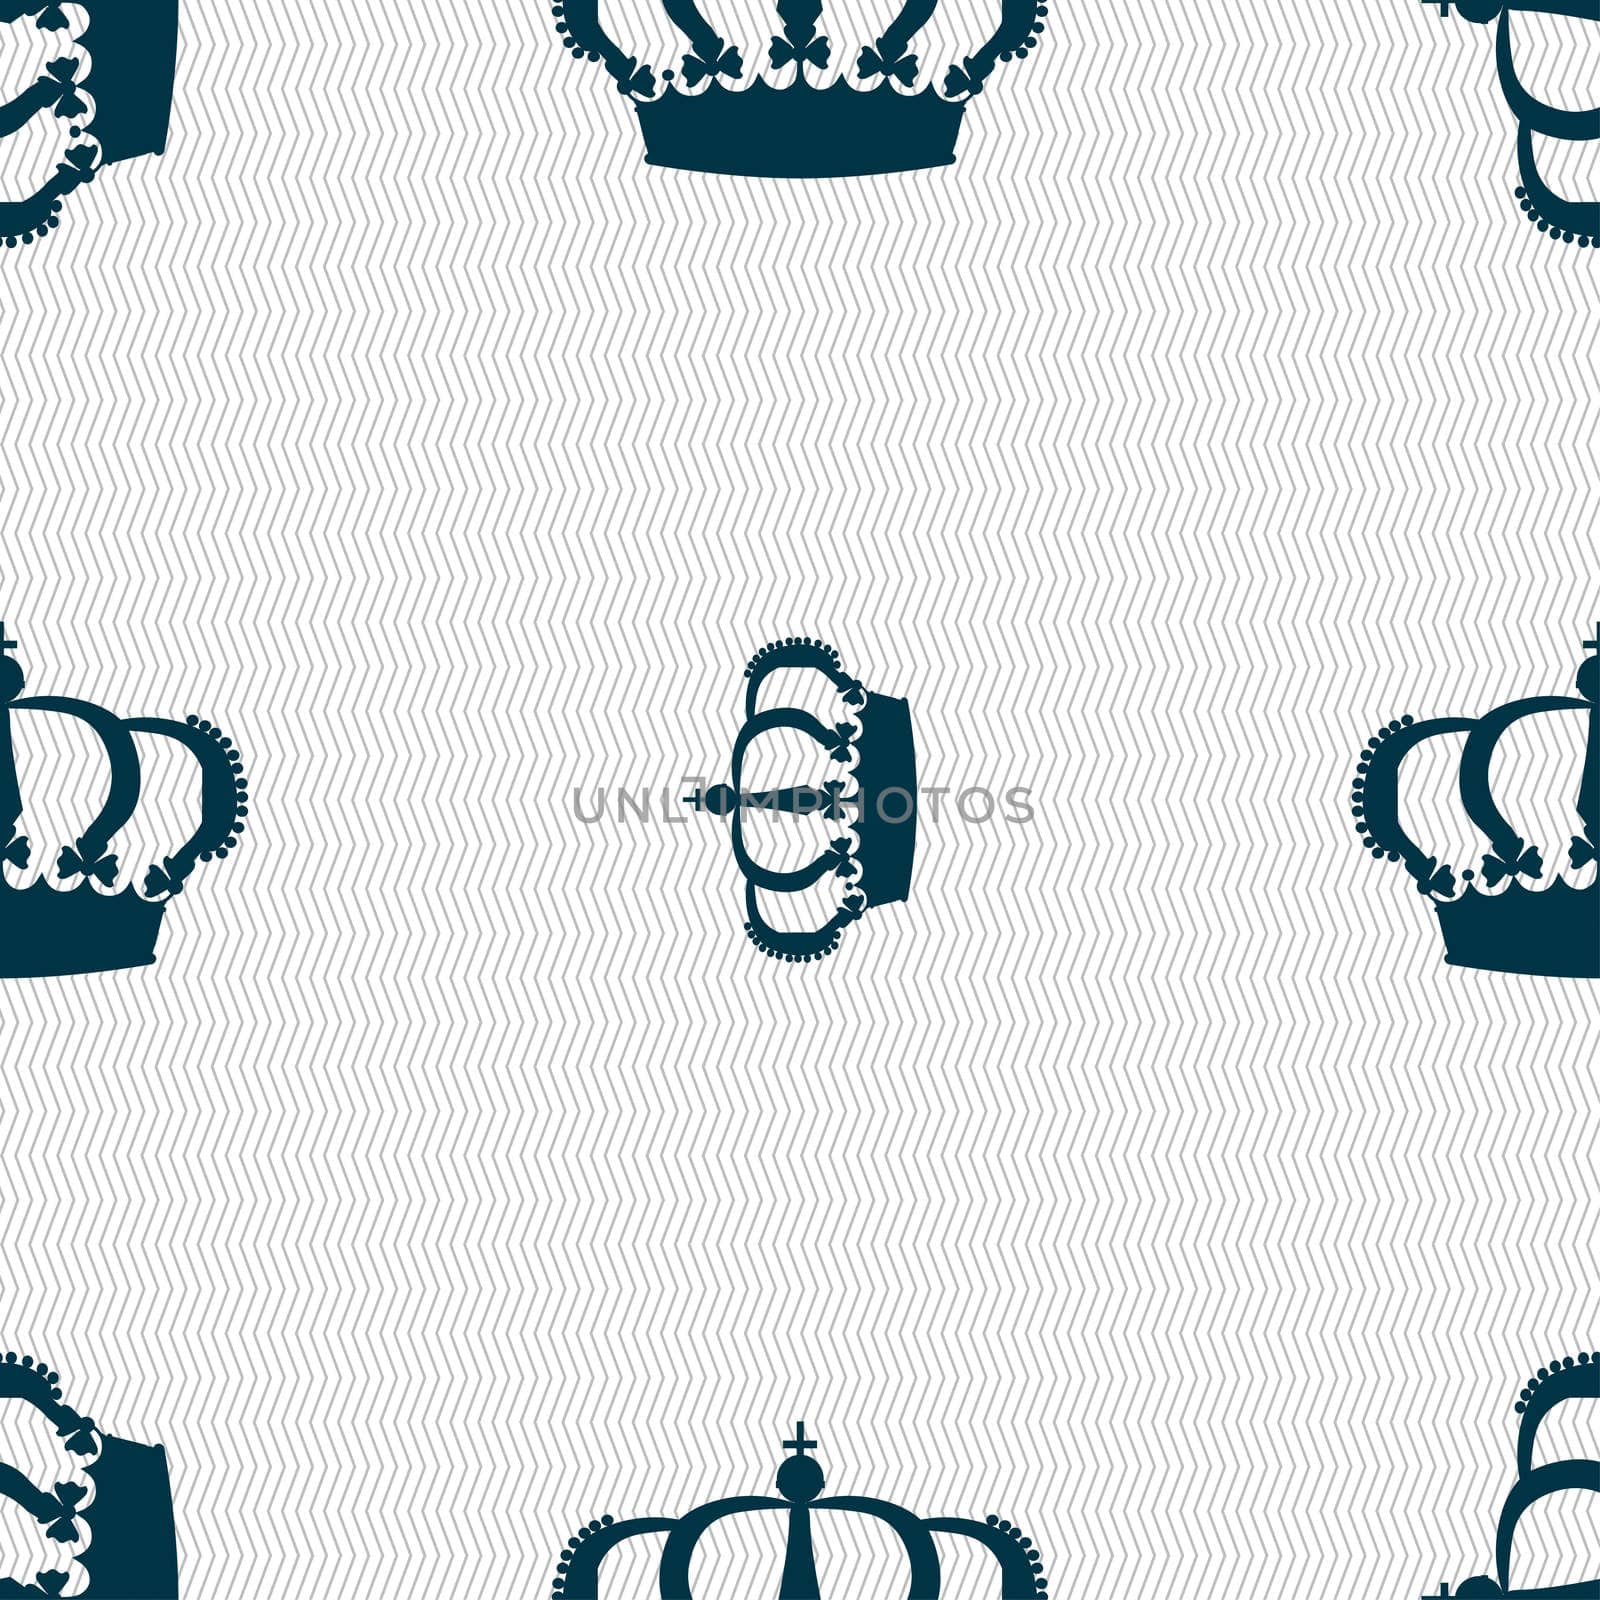 Crown icon sign. Seamless pattern with geometric texture. illustration